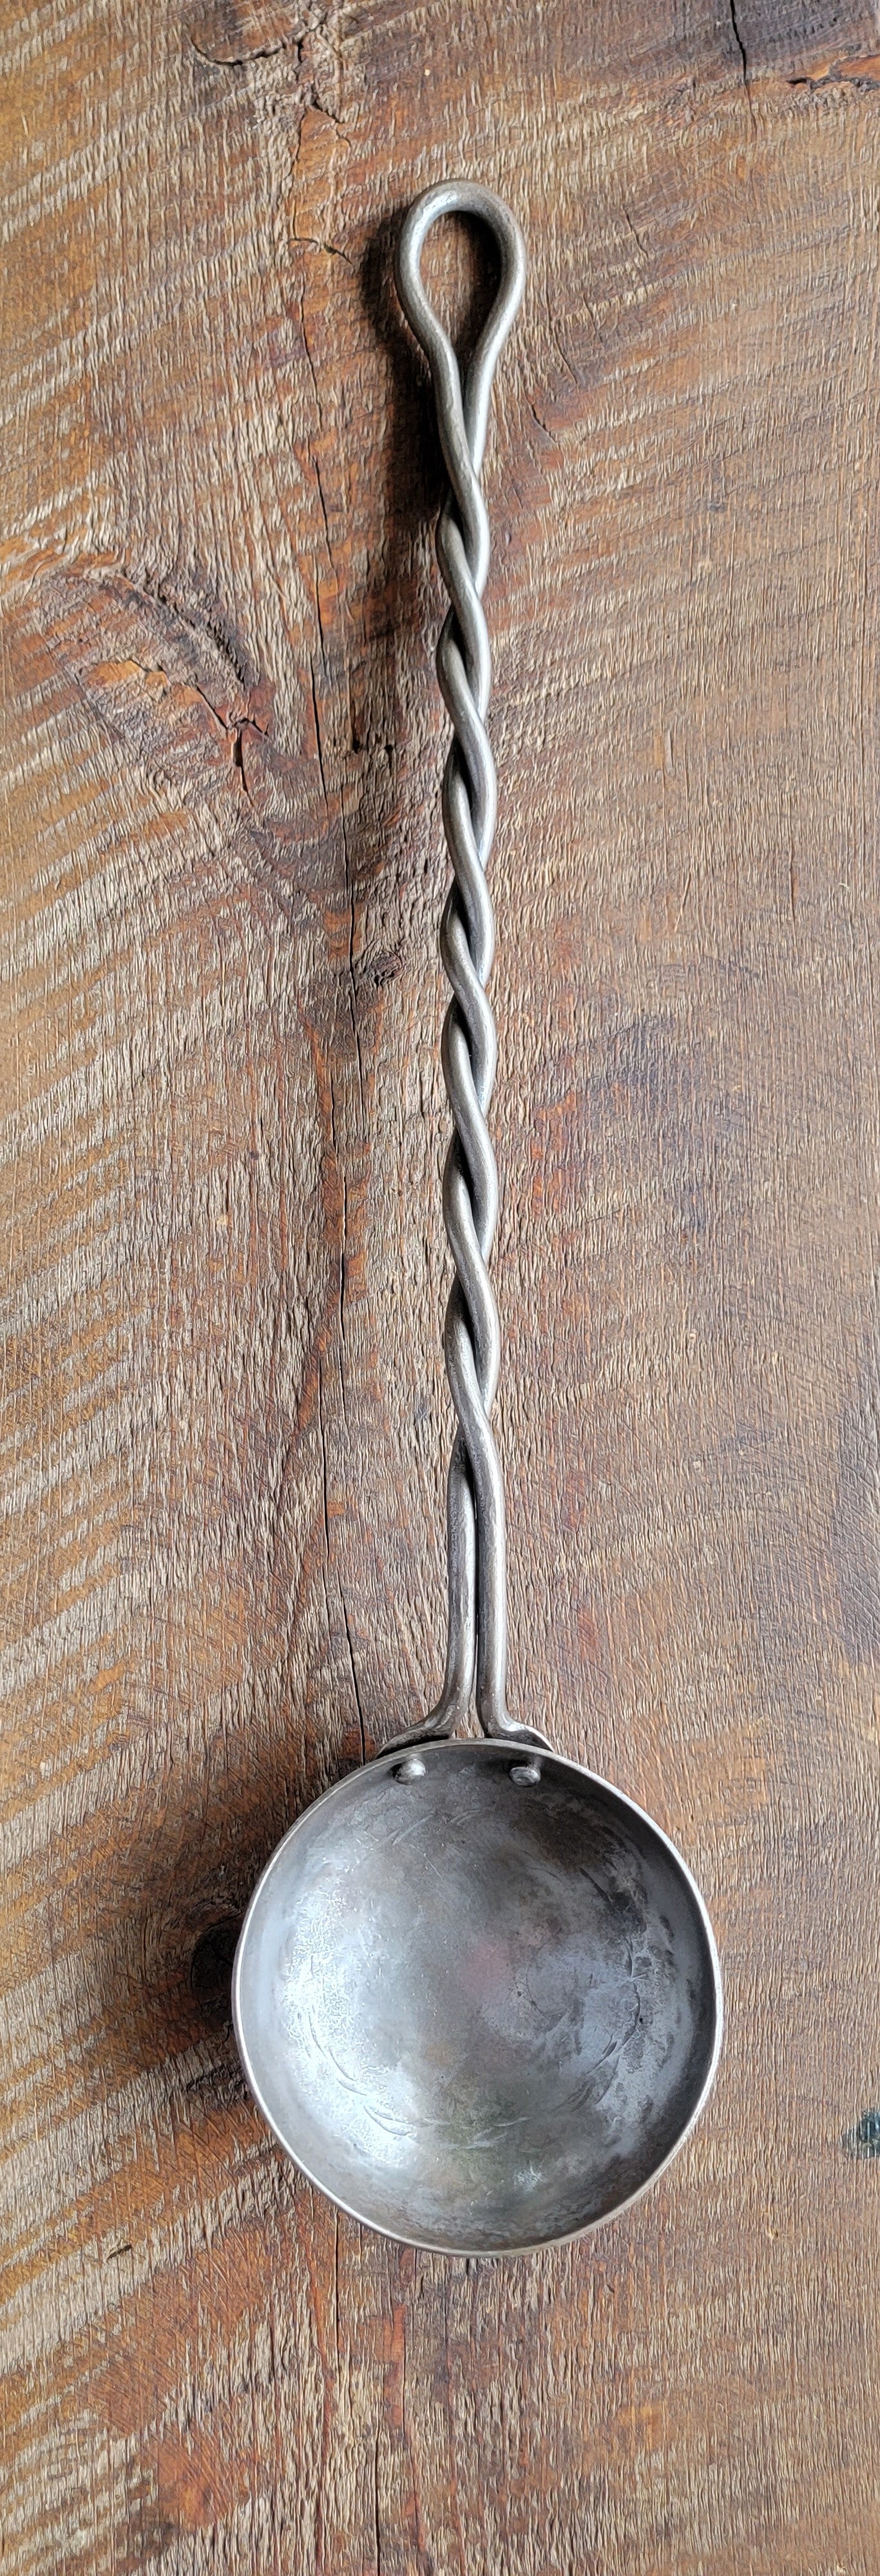 Hand Forged Twisted Steel Egg Spoon